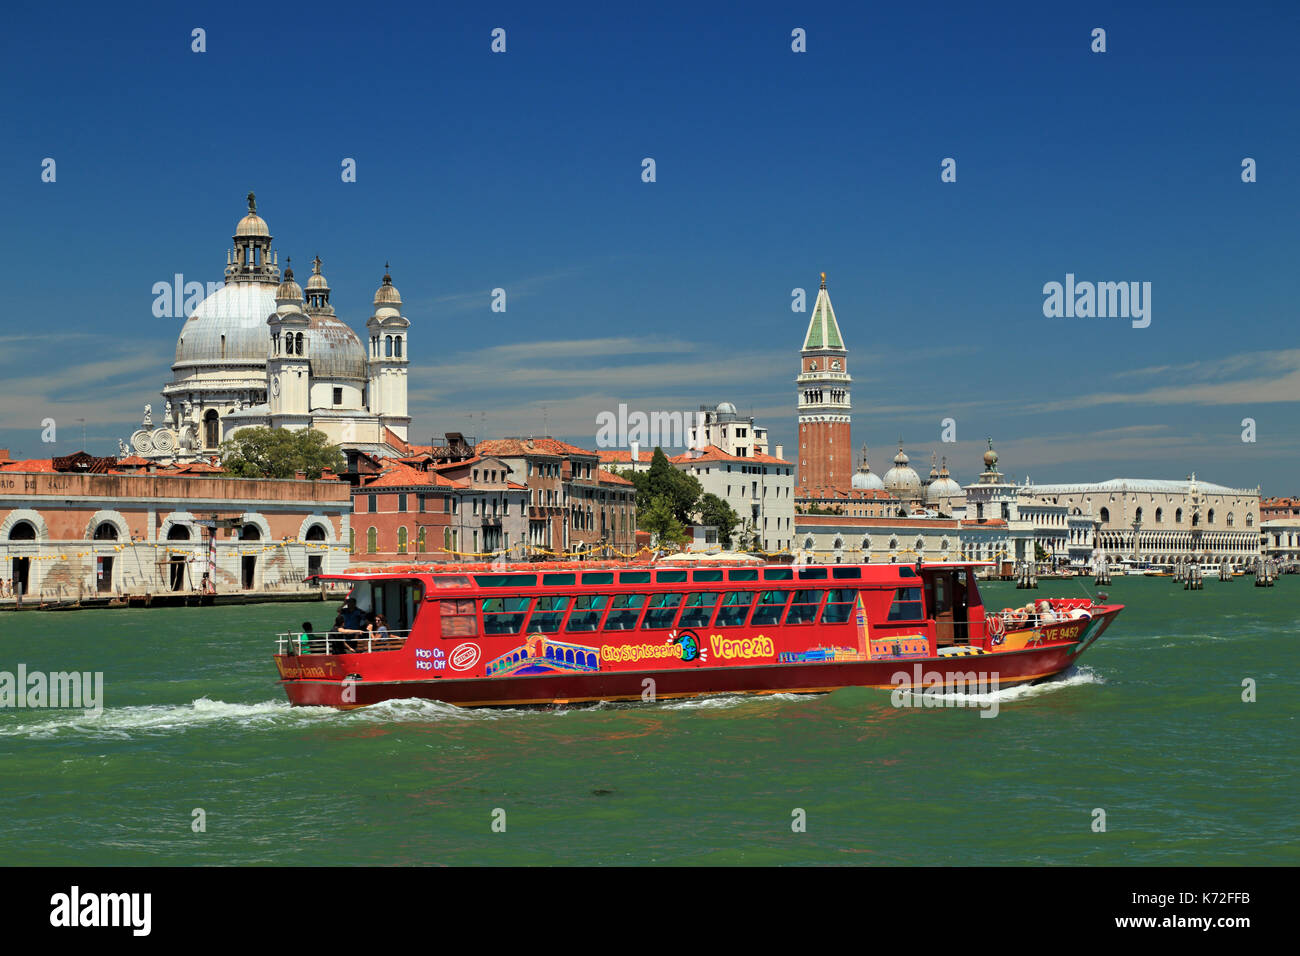 City Sightseeing tourist boat in Venice Stock Photo